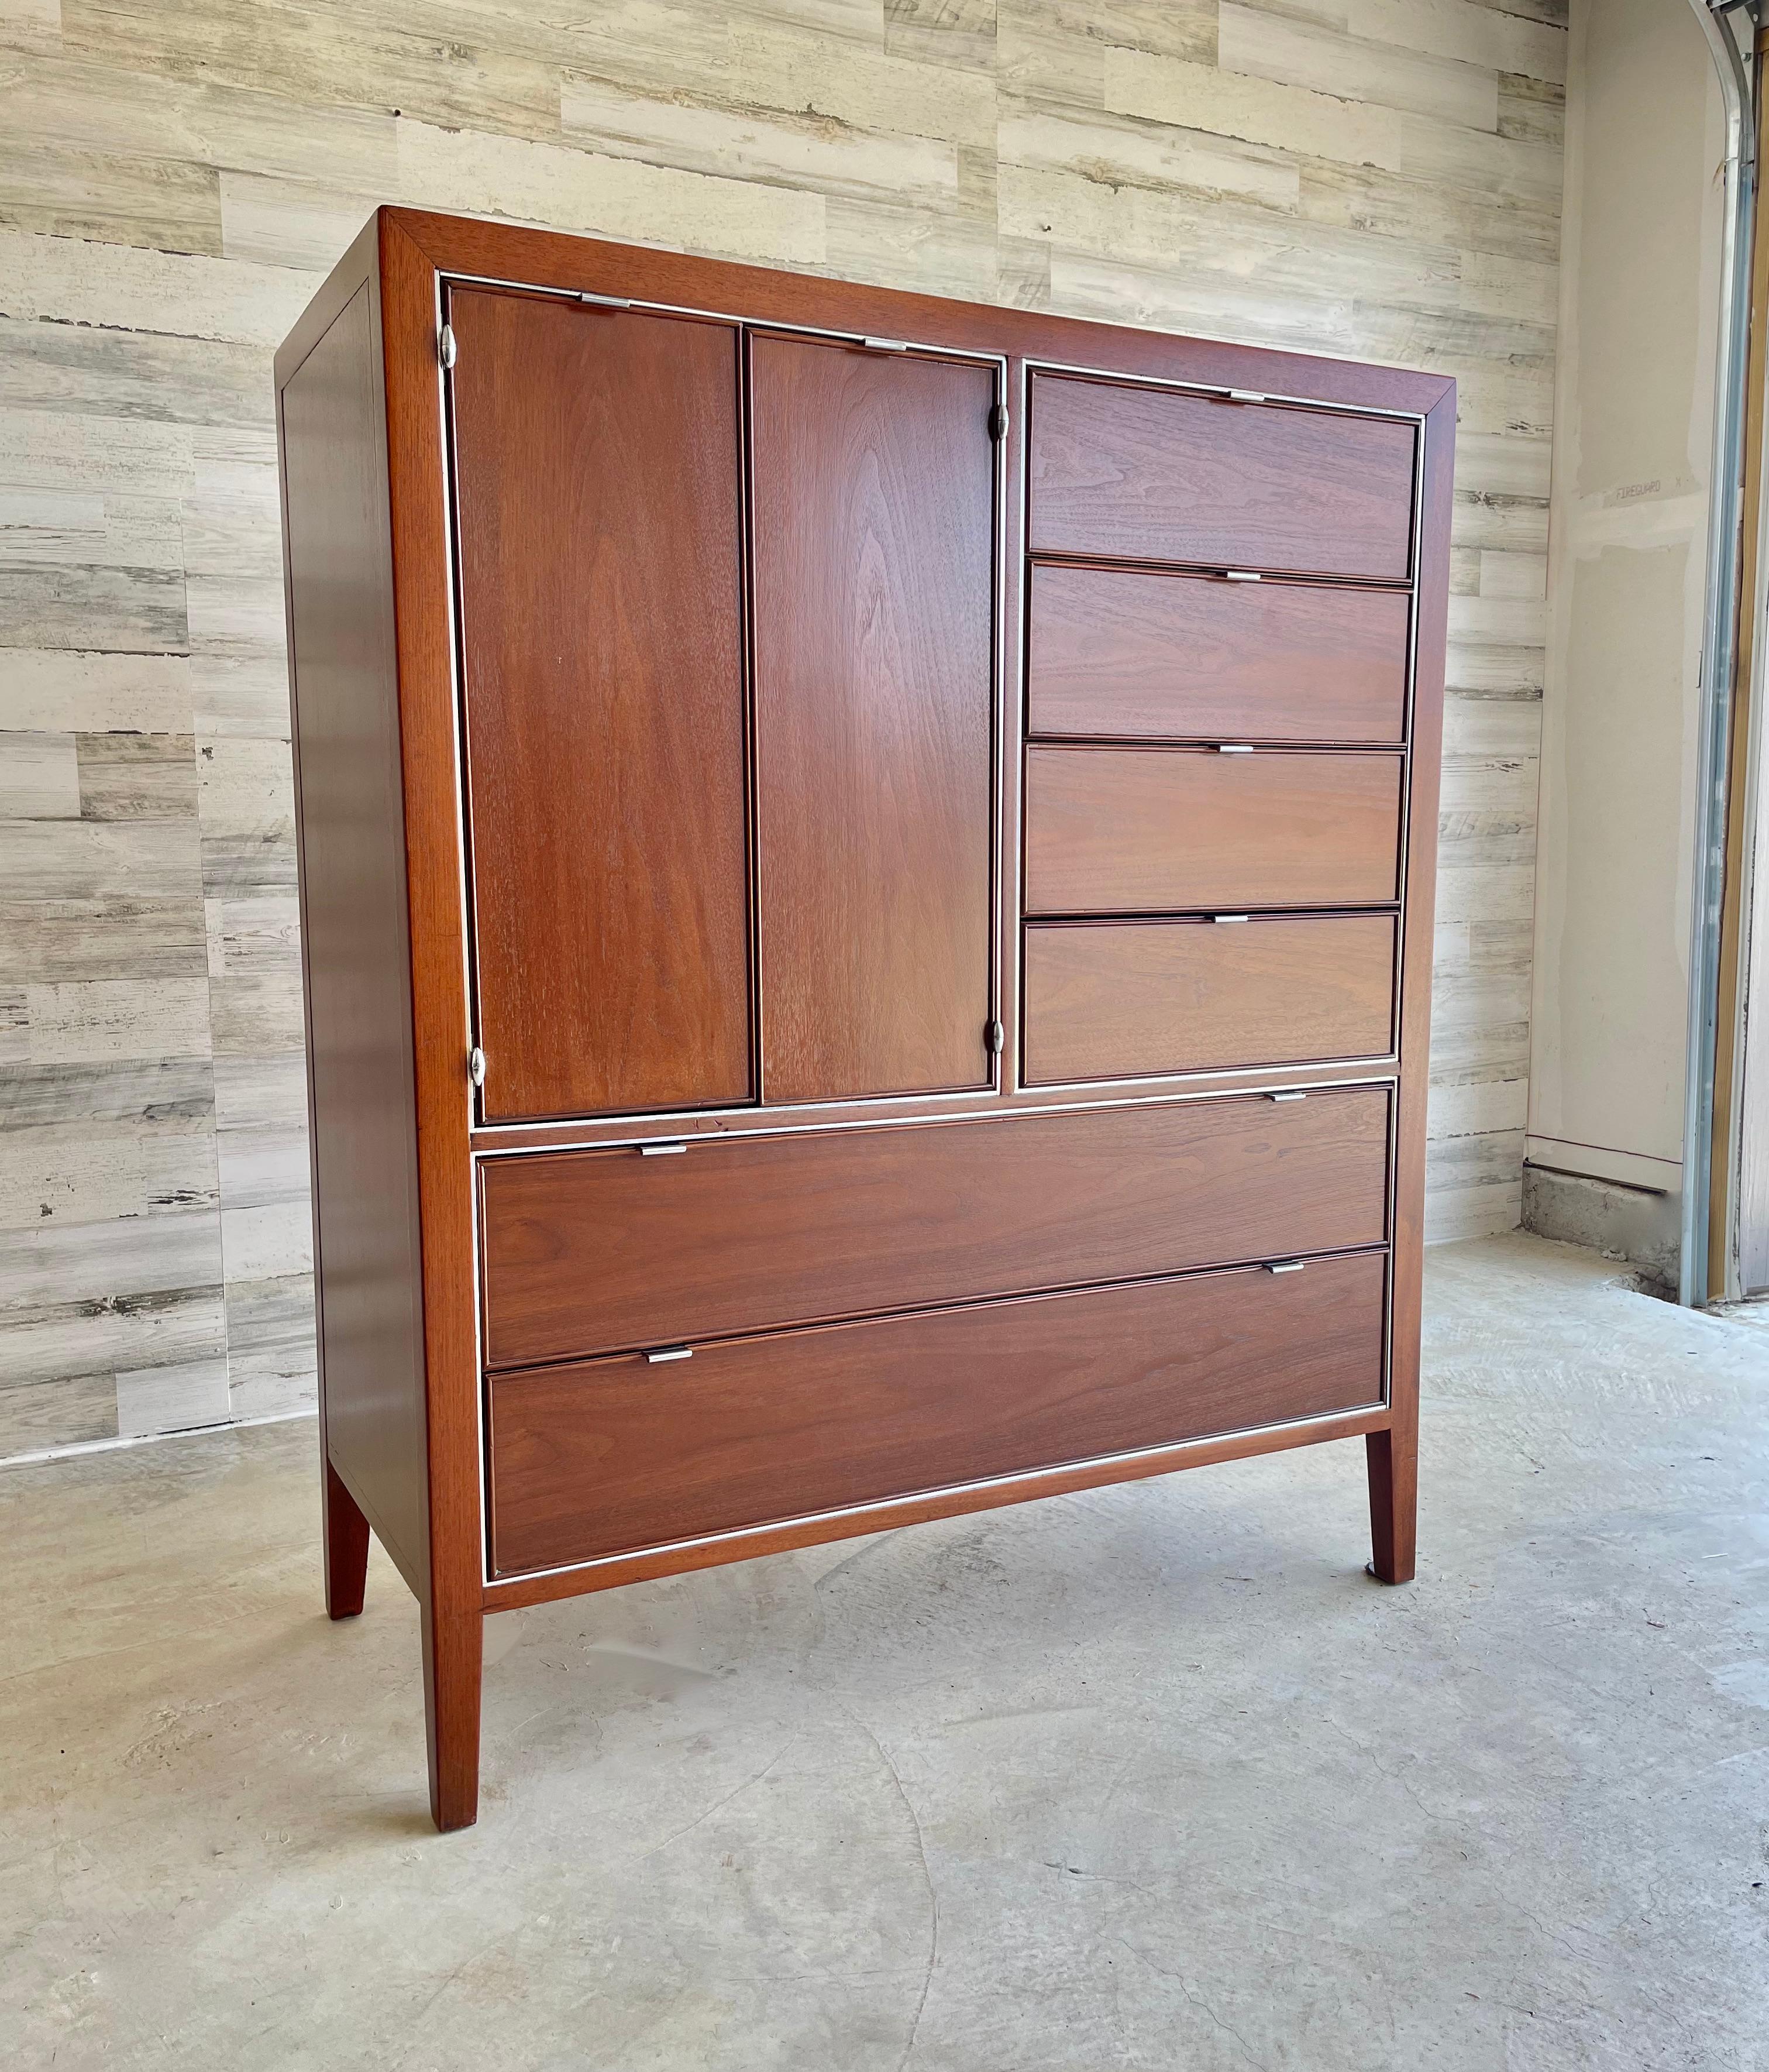 Drexel Viewpoint 70 Gentlemen’s chest \ dresser. Tons of drawers for maximum storage. The left side drawers make a perfect jewelry storage space. Refinished in a walnut color with chrome trim and pulls.